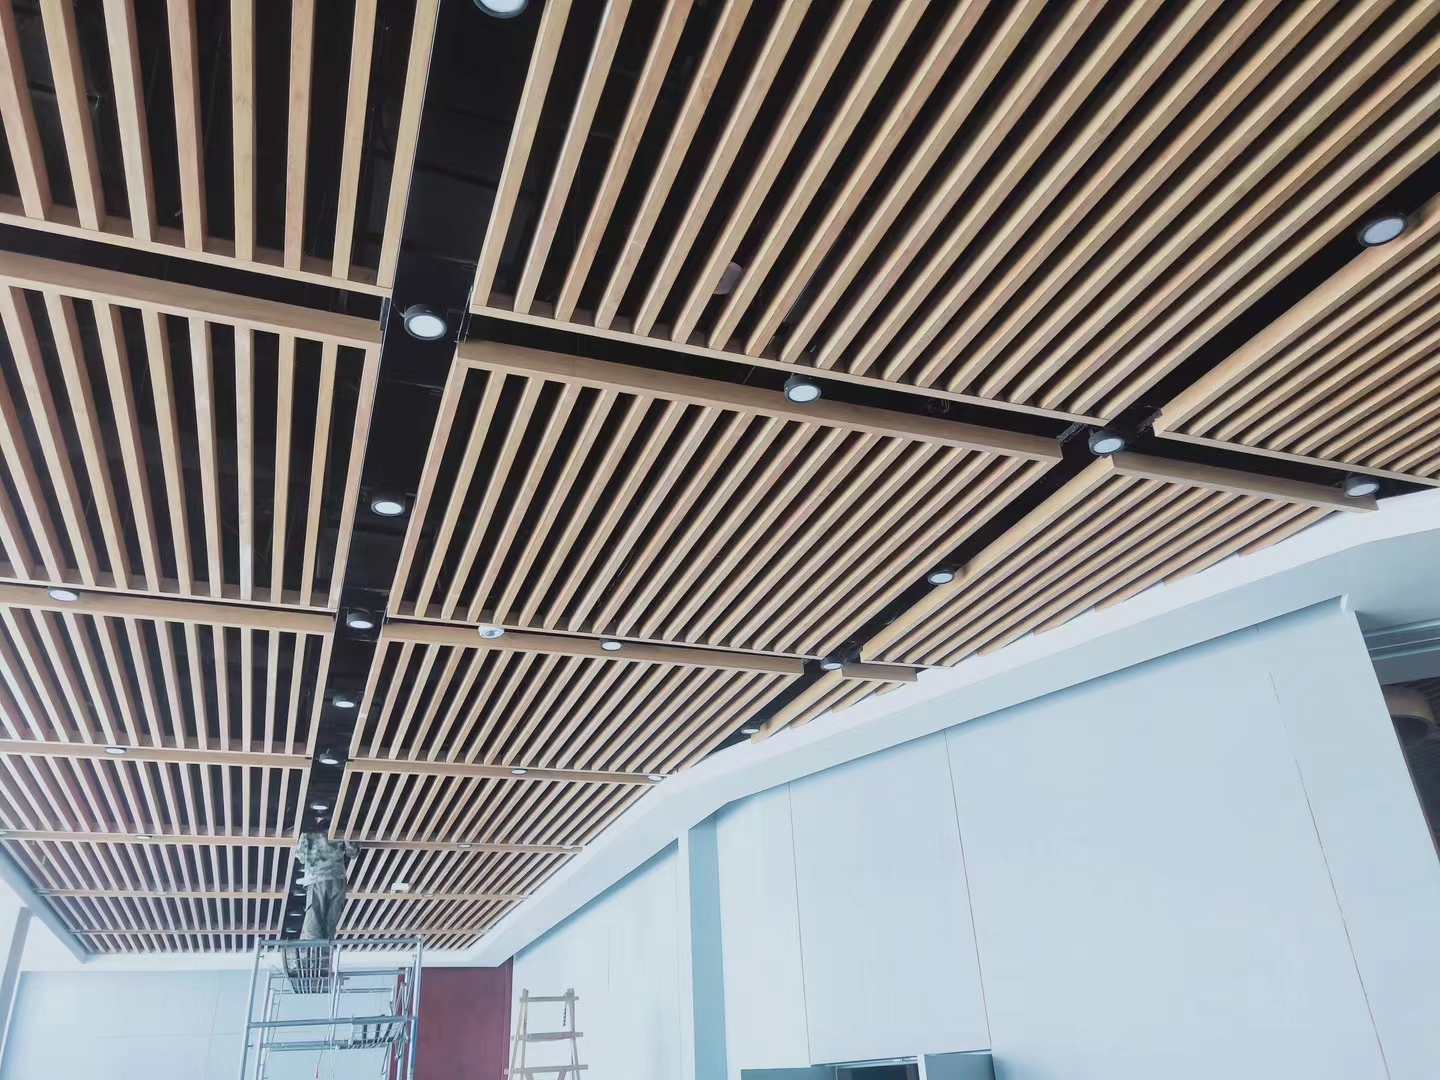 Wooden color ceiling